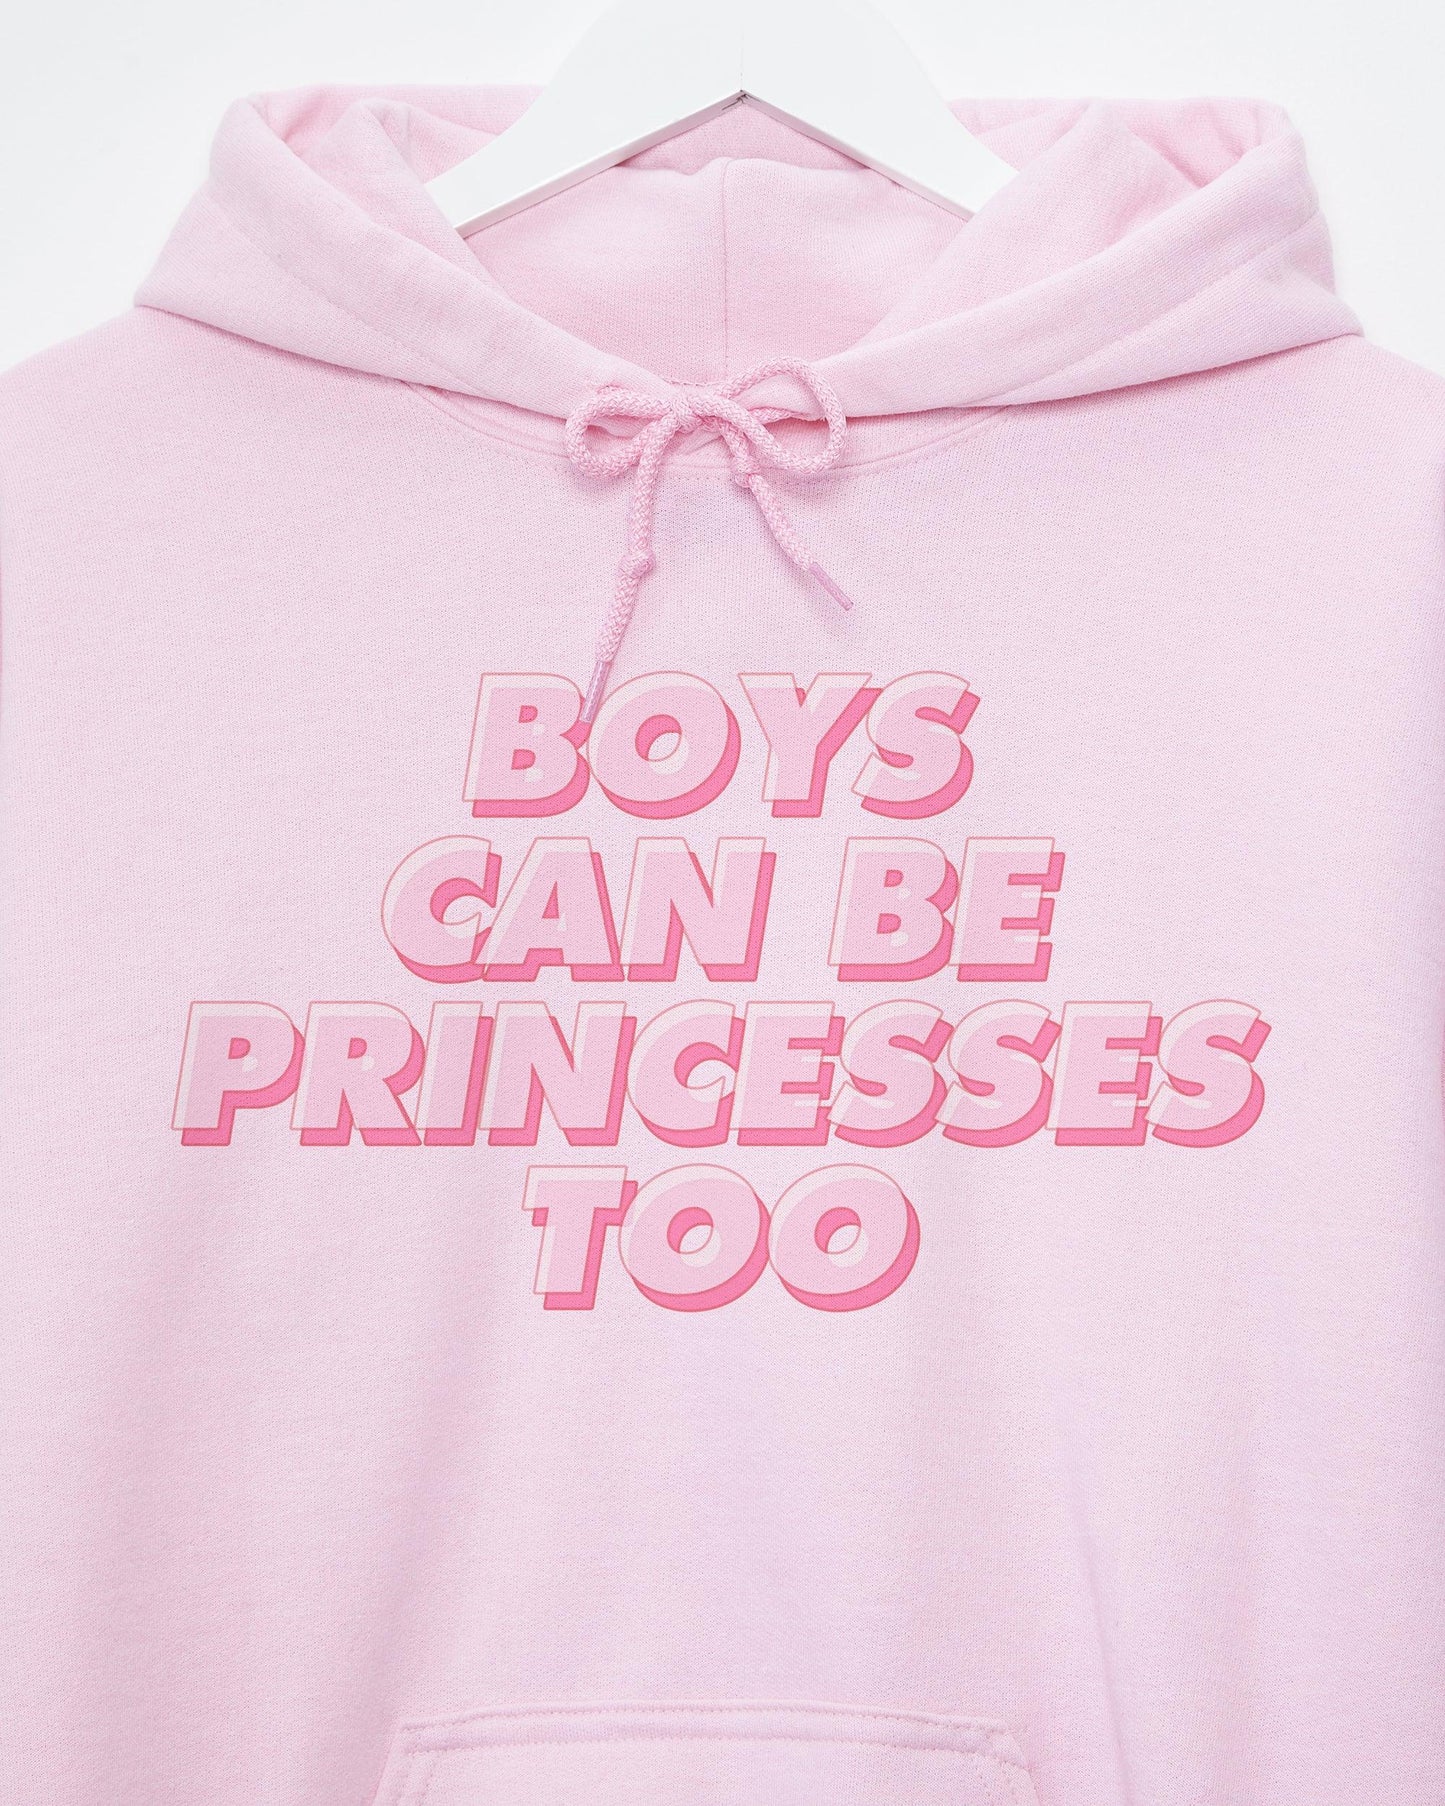 Boys can be princesses too on pink - pullover hoodie.